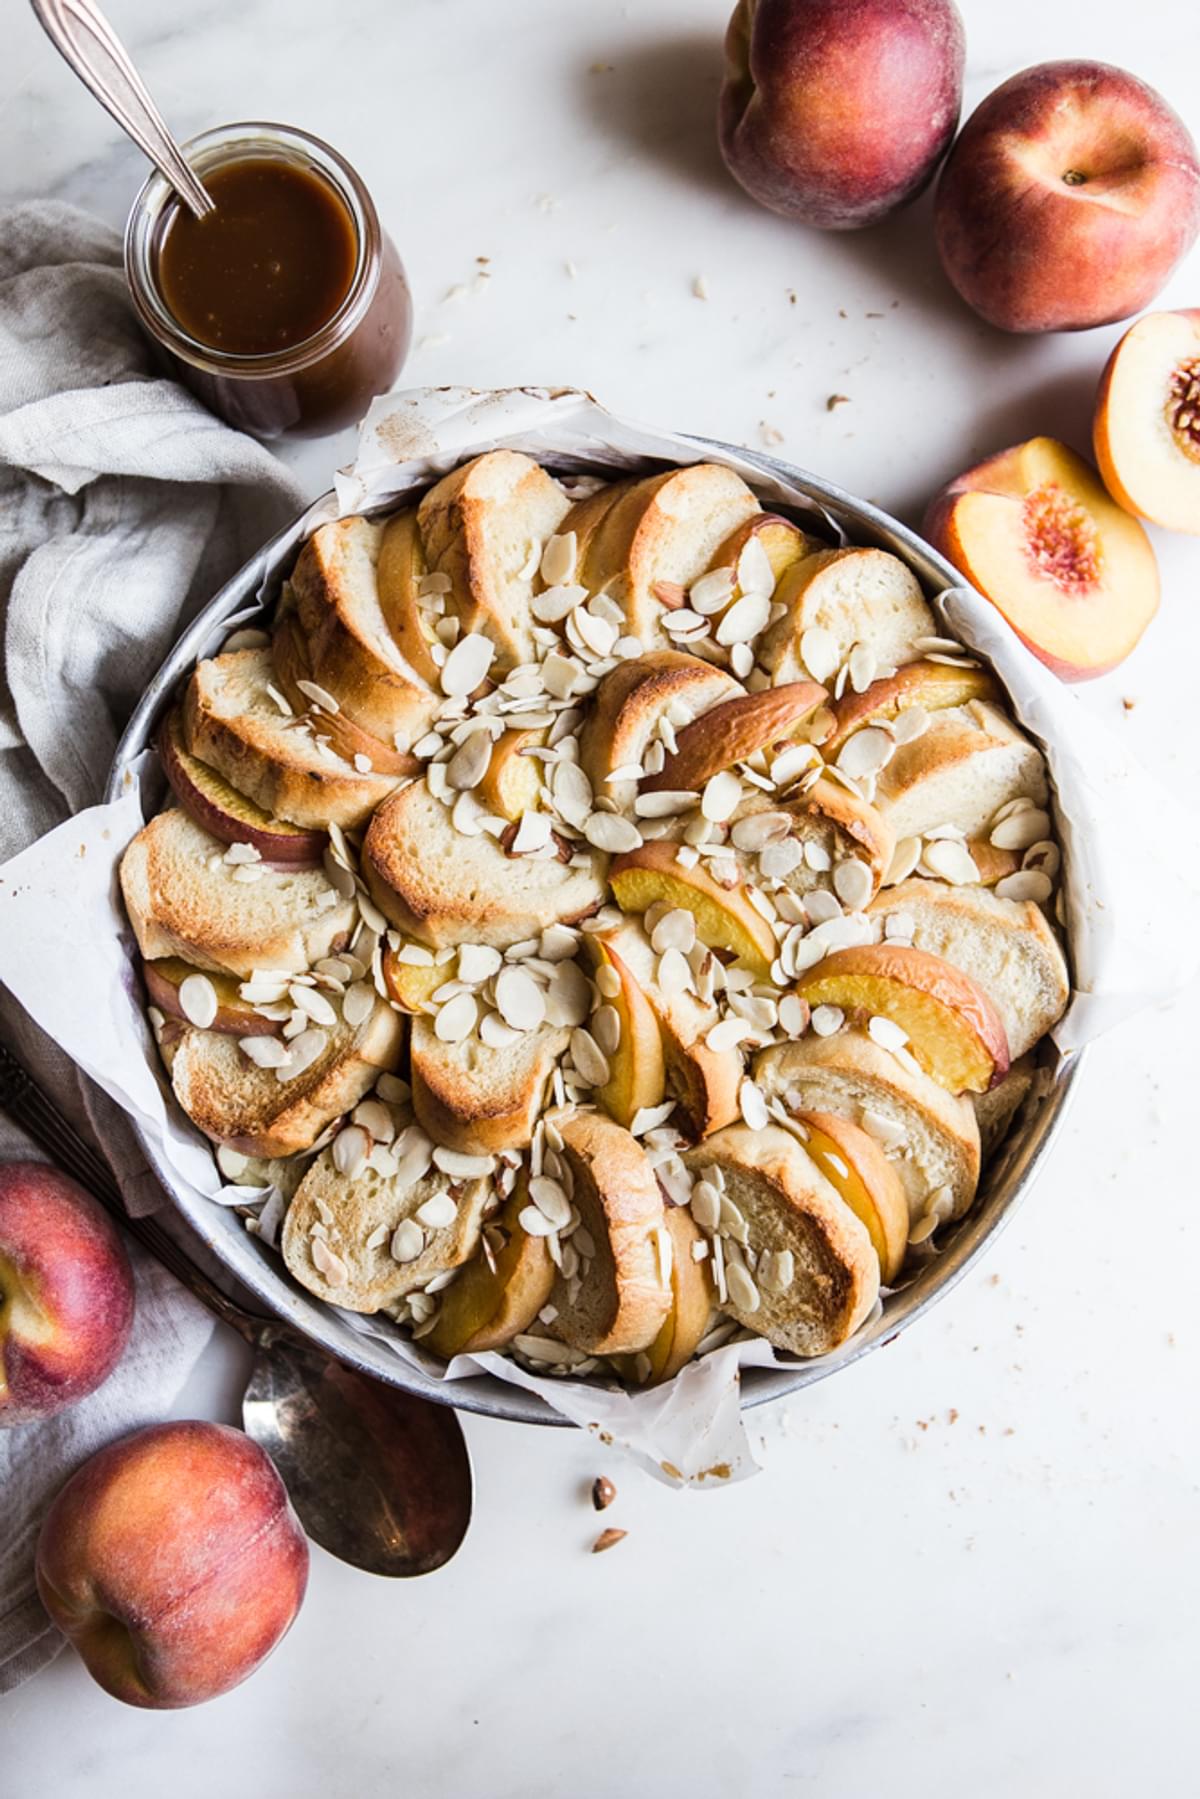 Almond Peach Bread Pudding with peaches and caramel sauce